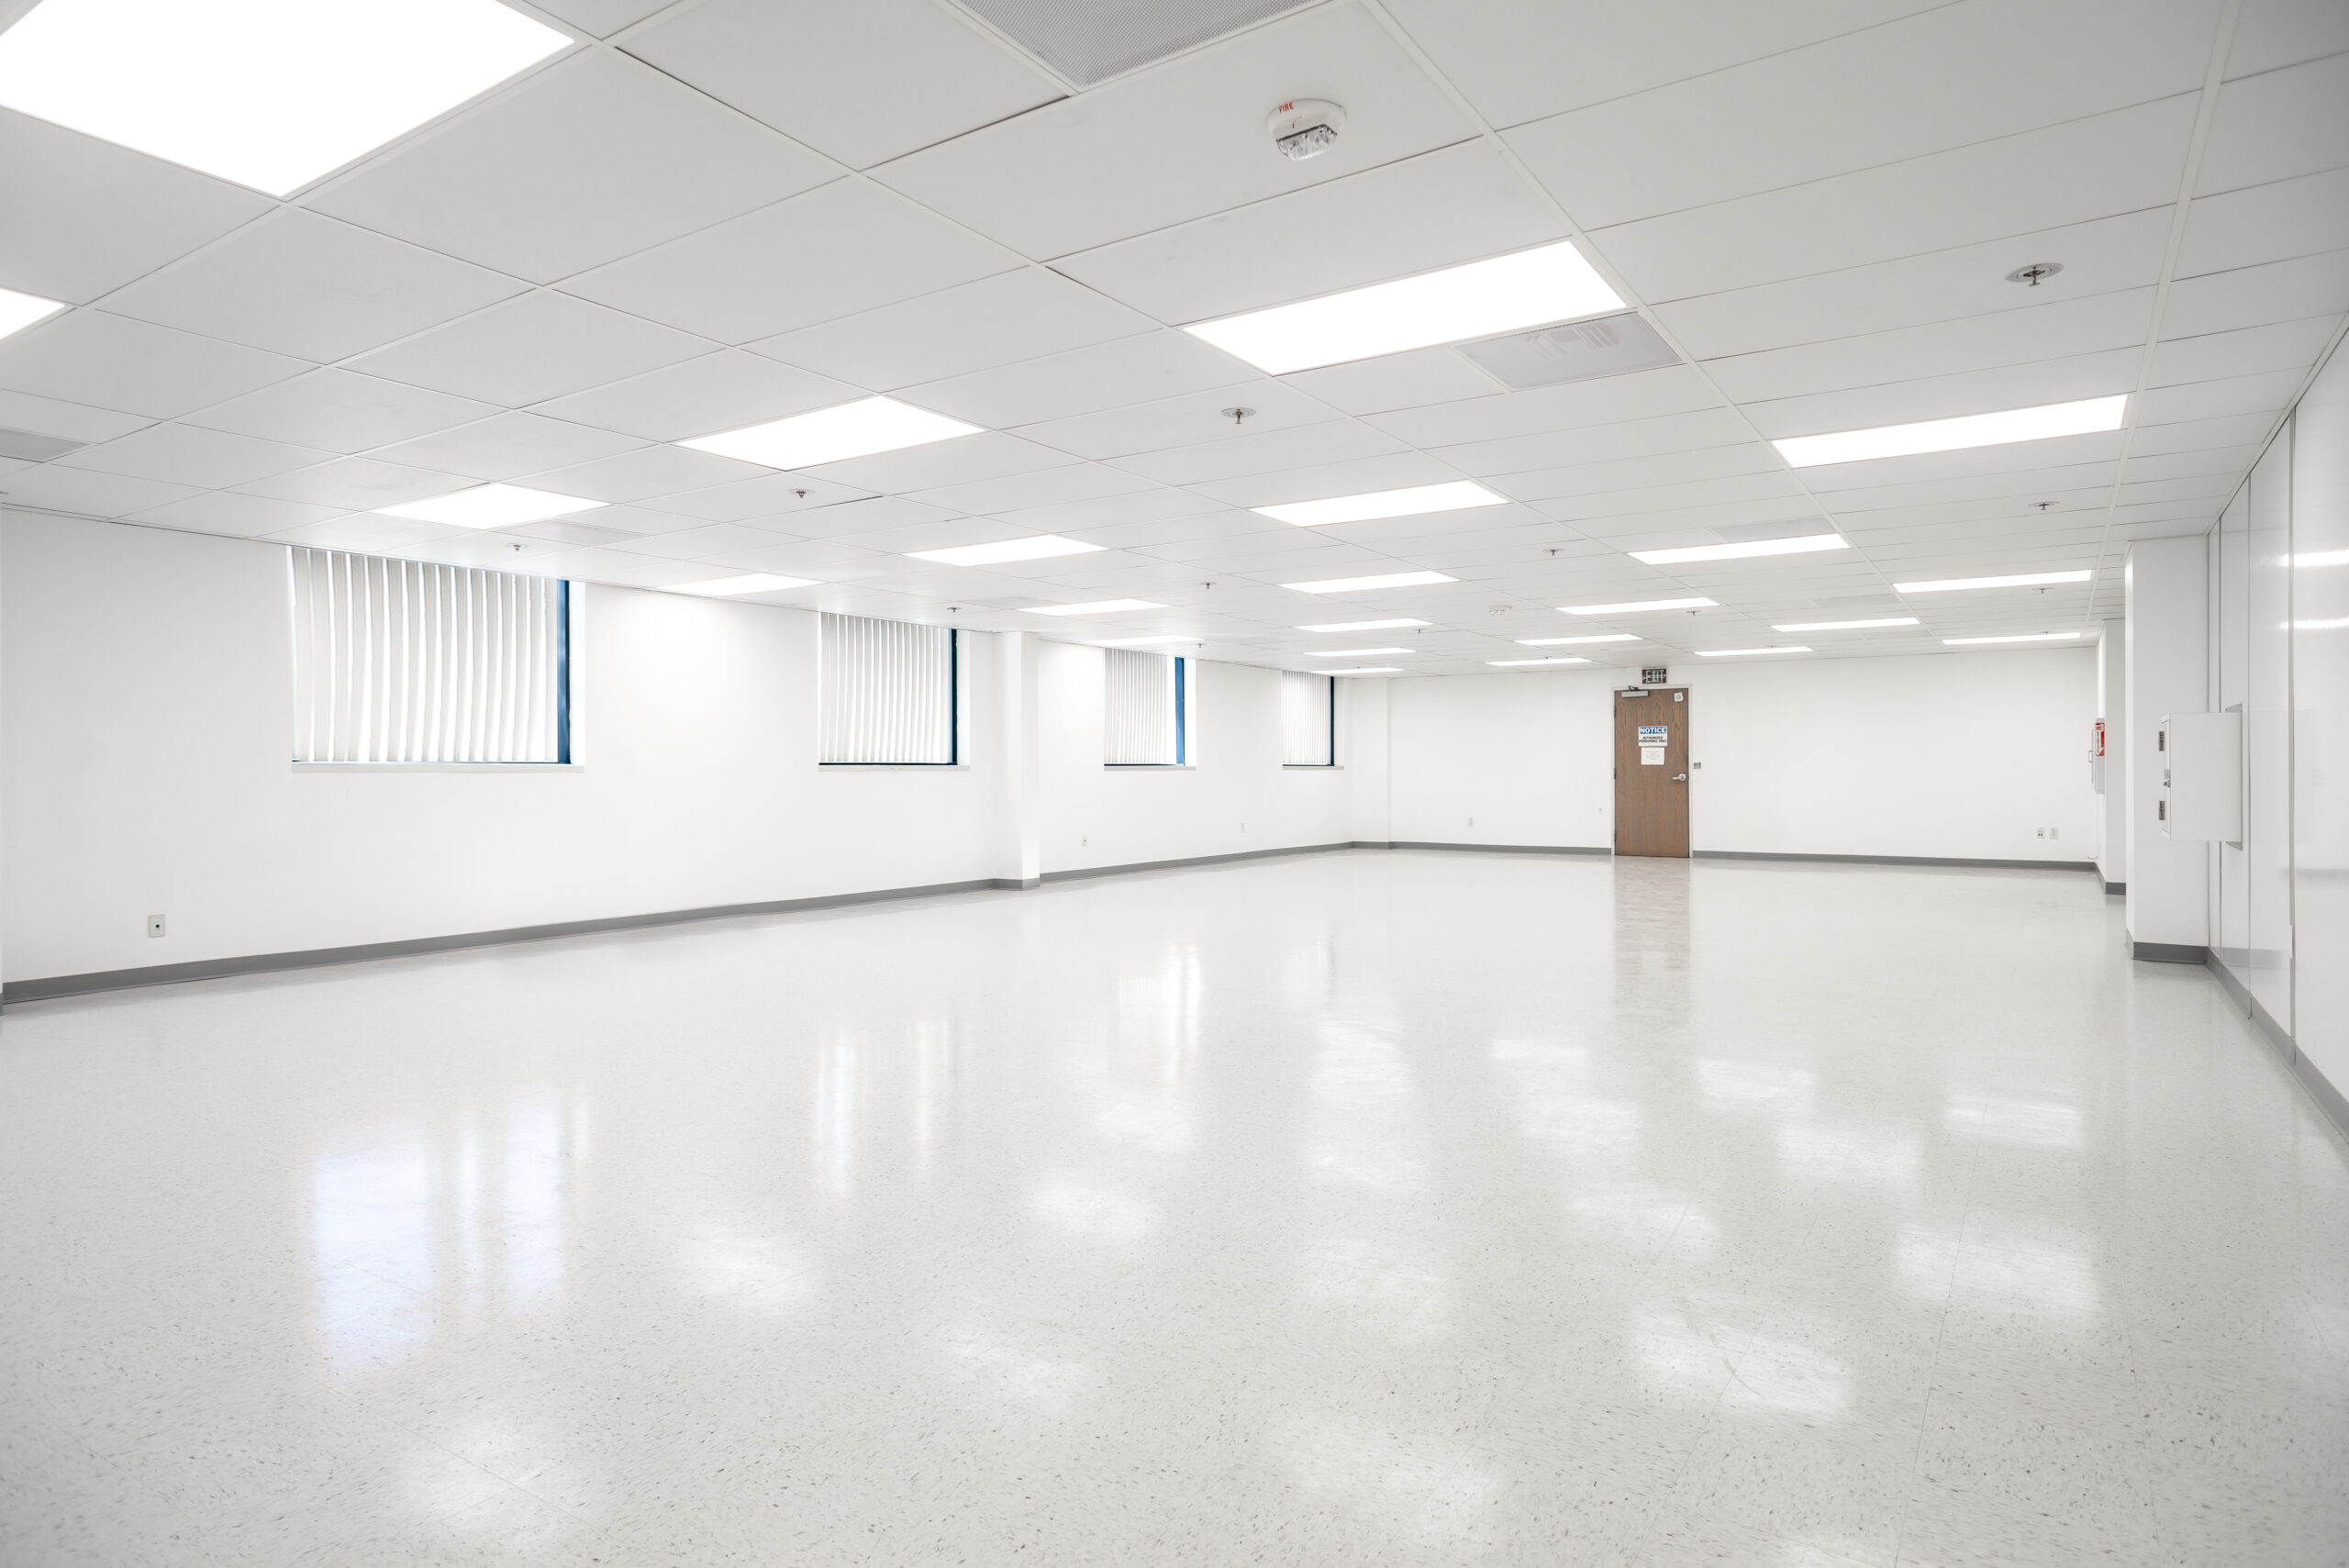 Clean room by Allied Cleanrooms - USP 797, and ISO 4, ISO 5, ISO 6, ISO 7, and IS0 8, cGMP cleanroom manufacturing, soft wall cleanrooms